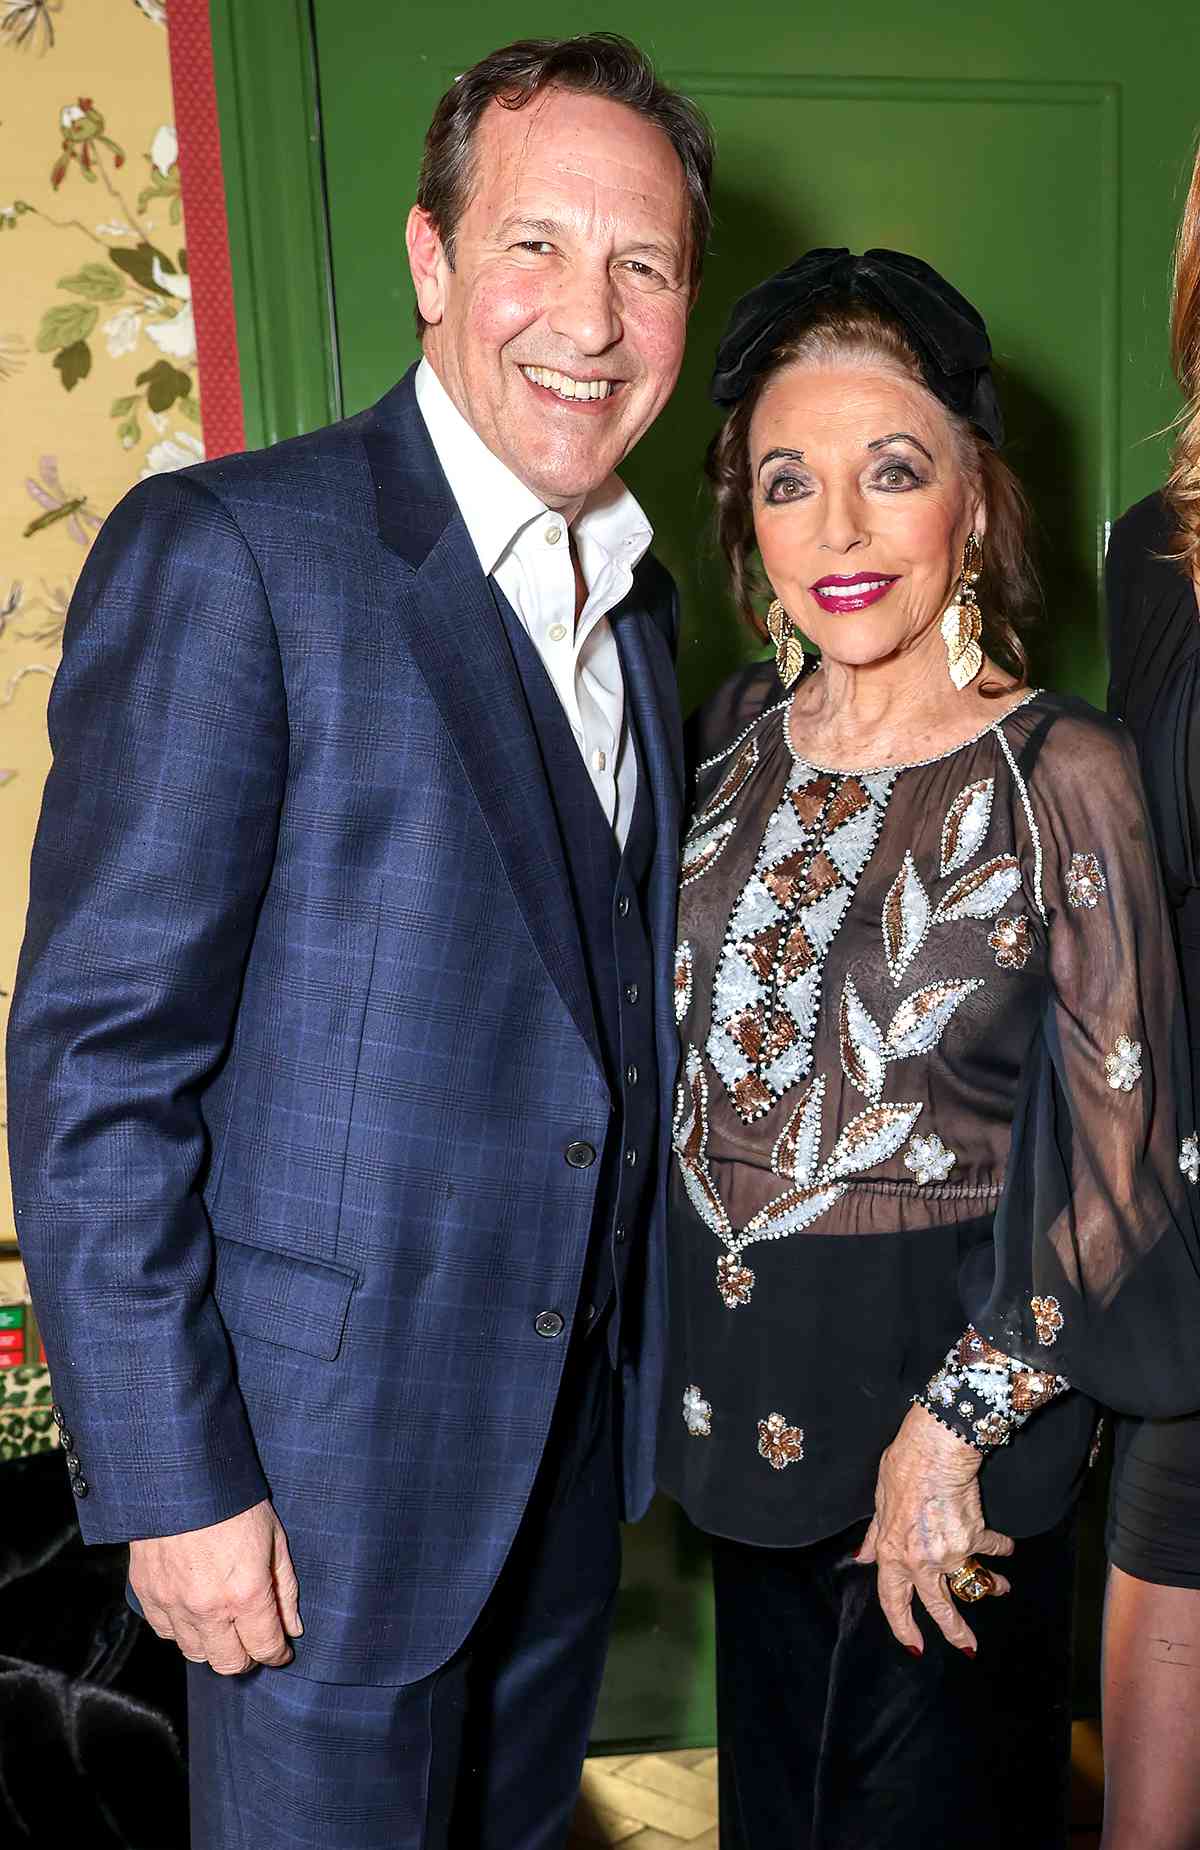 Percy Gibson, Dame Joan Collins, Gabriela Peacock and Iris Peacock attend a special event celebrating the success of nutraceutical expert Gabriela Peacock's best-selling second book, "2 Weeks to A Younger You" and the relaunch of her Longevity Range, at the Broadwick Soho Hotel on April 23, 2024 in London, England